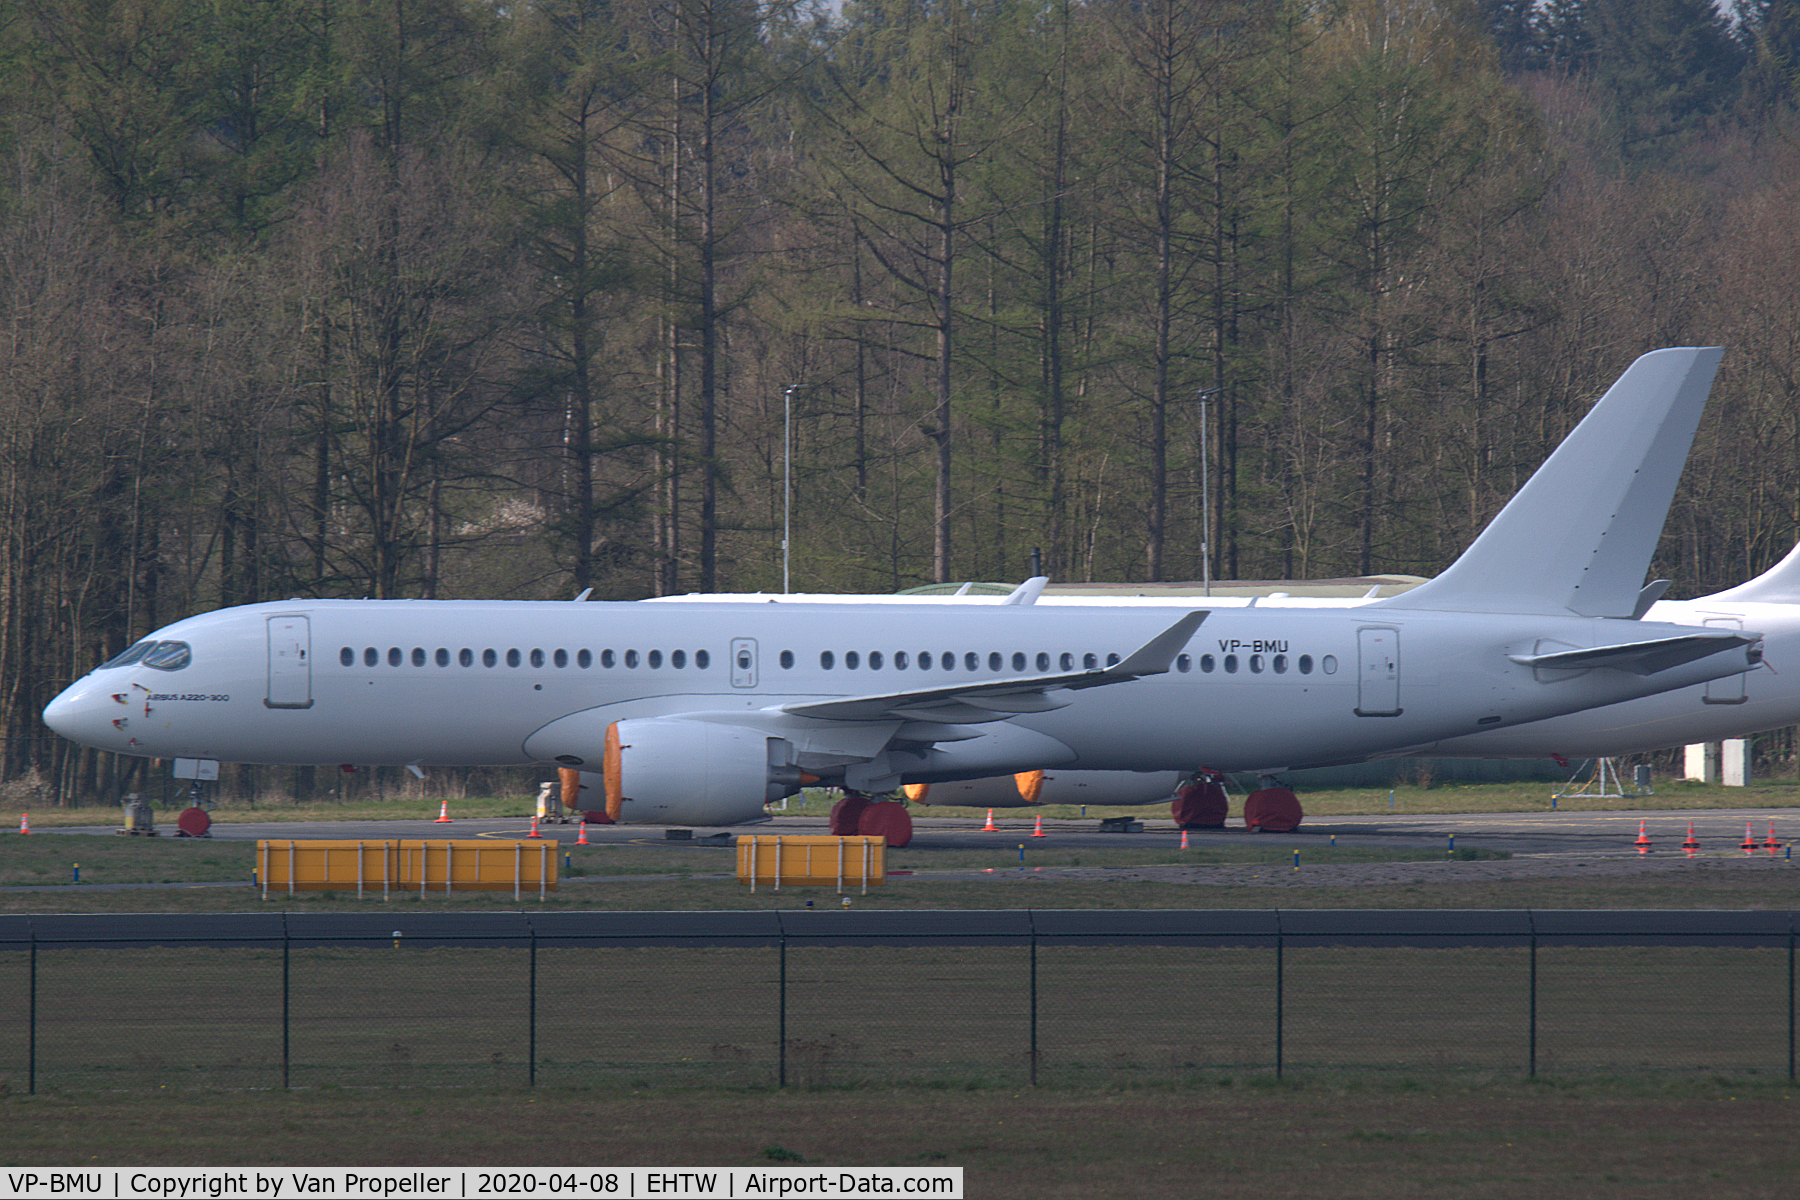 VP-BMU, 2019 Airbus A220-300 C/N 55072, Undelivered Airbus A220-300 stored at Twente airport, the Netherlands. Originally destined for lease to Red Wings Airlines of Russia, but cancelled. Waiting for a new customer